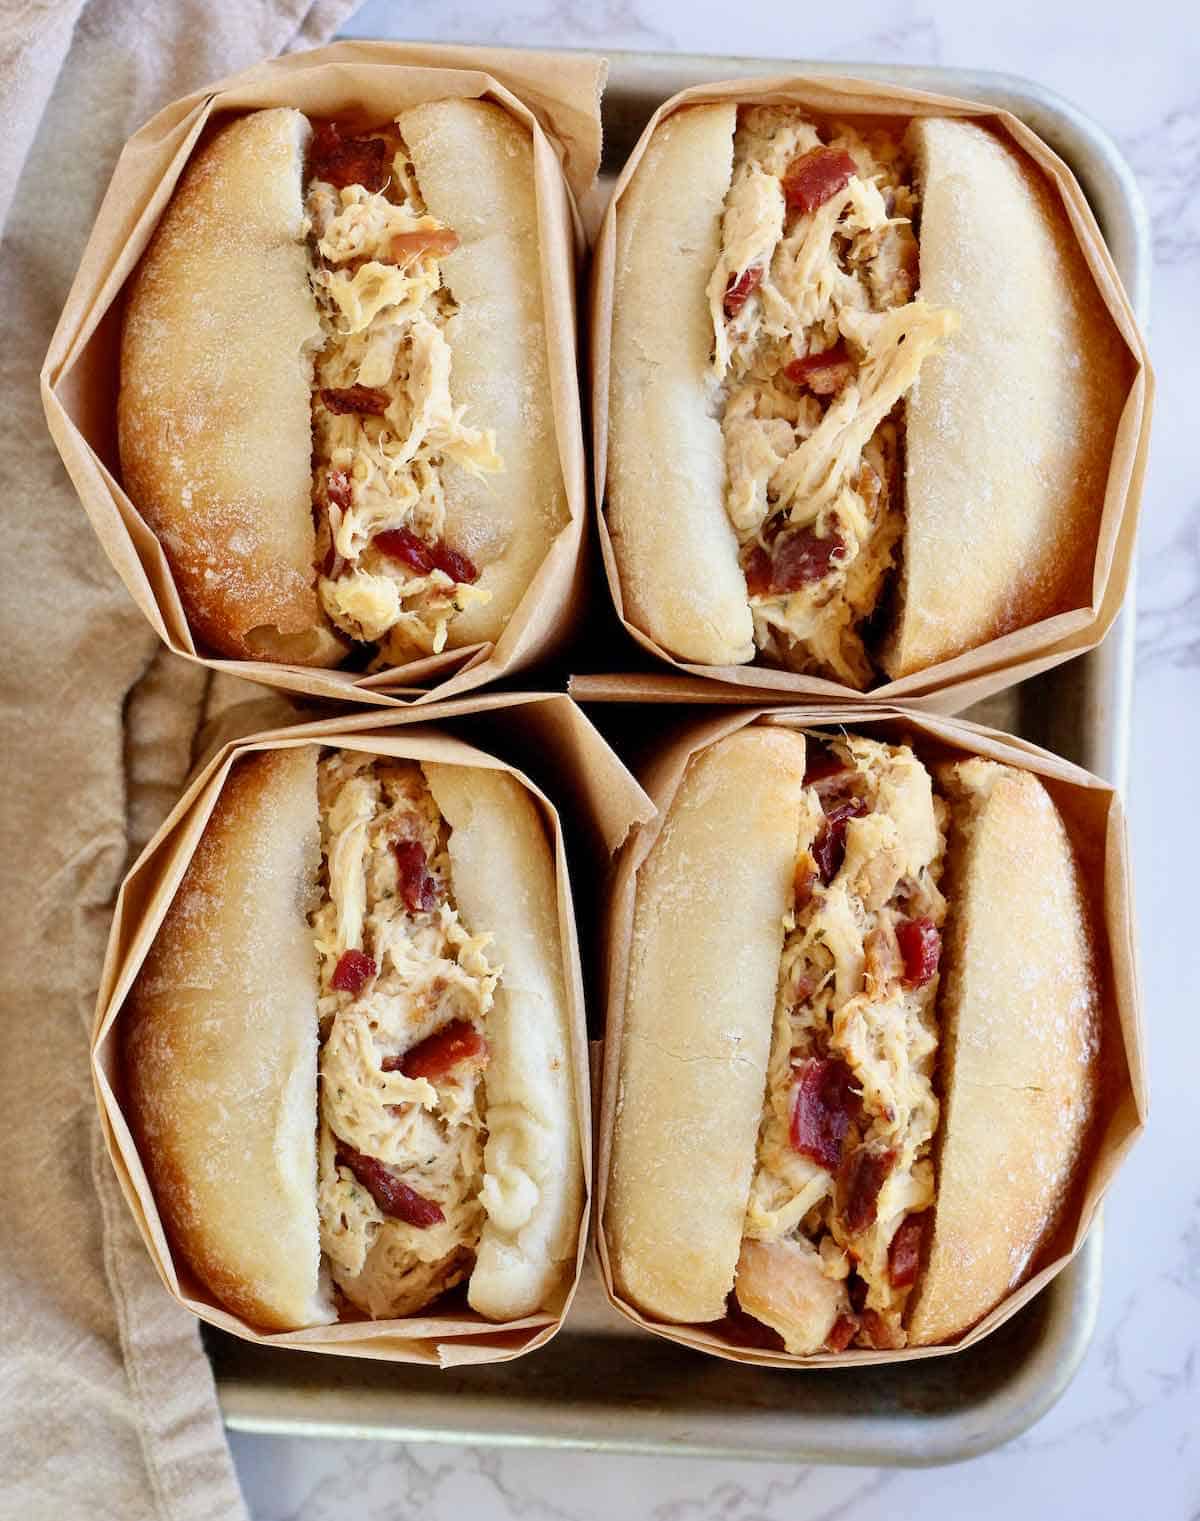 Four chicken bacon sandwiches wrapped in napkins.